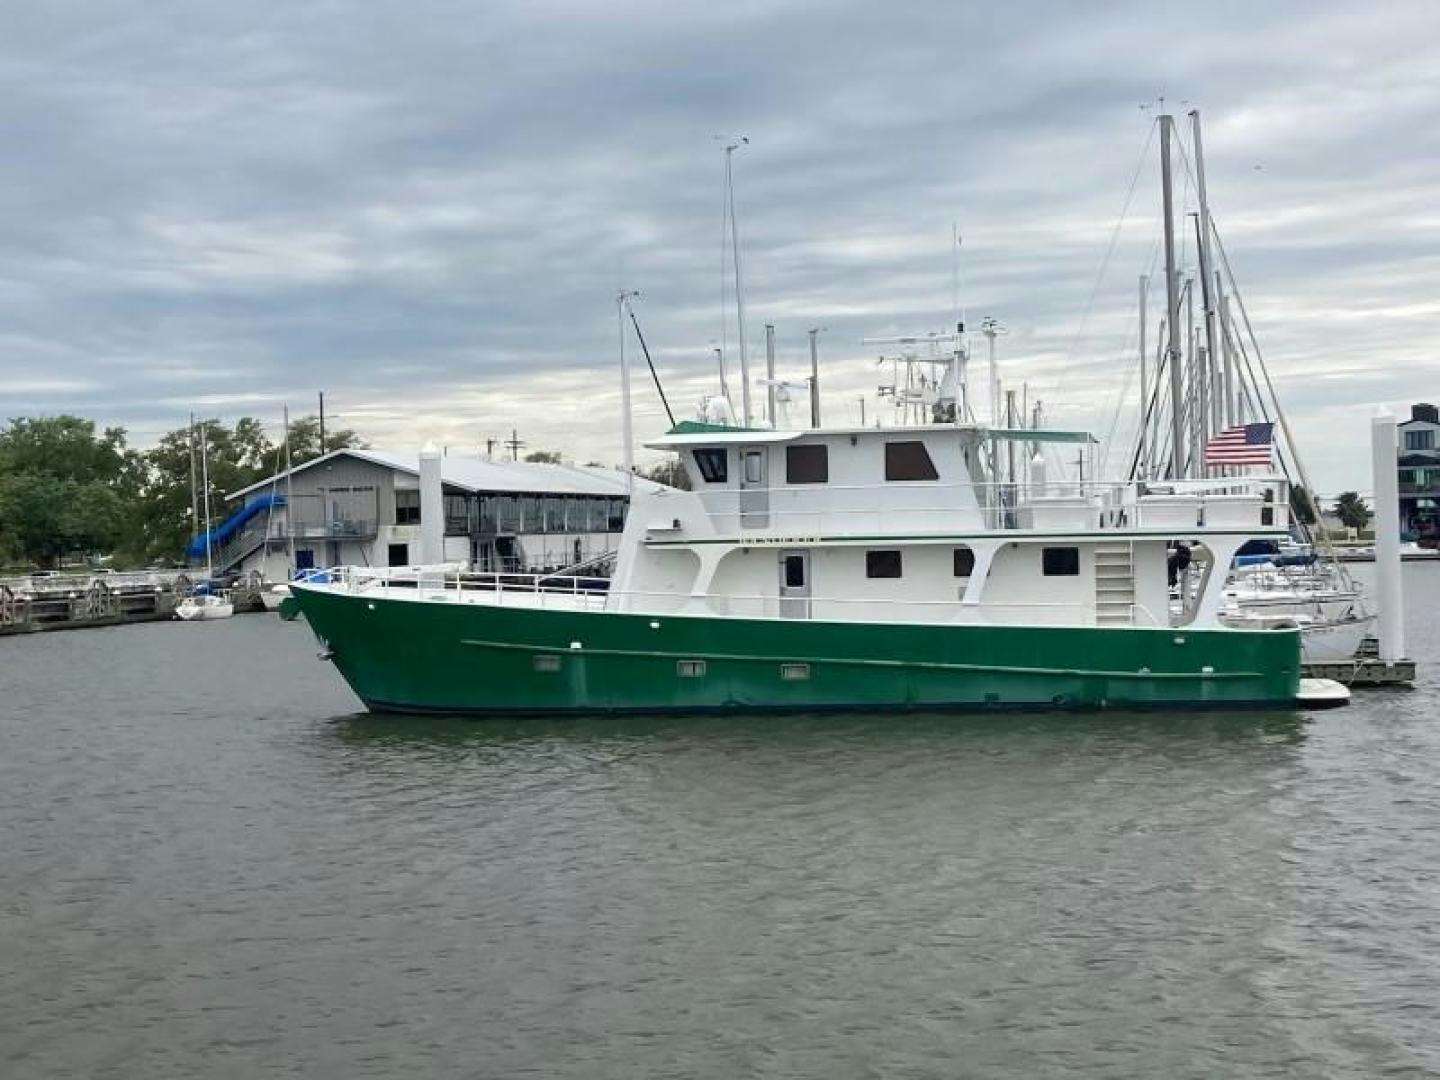 Wanderer
Yacht for Sale